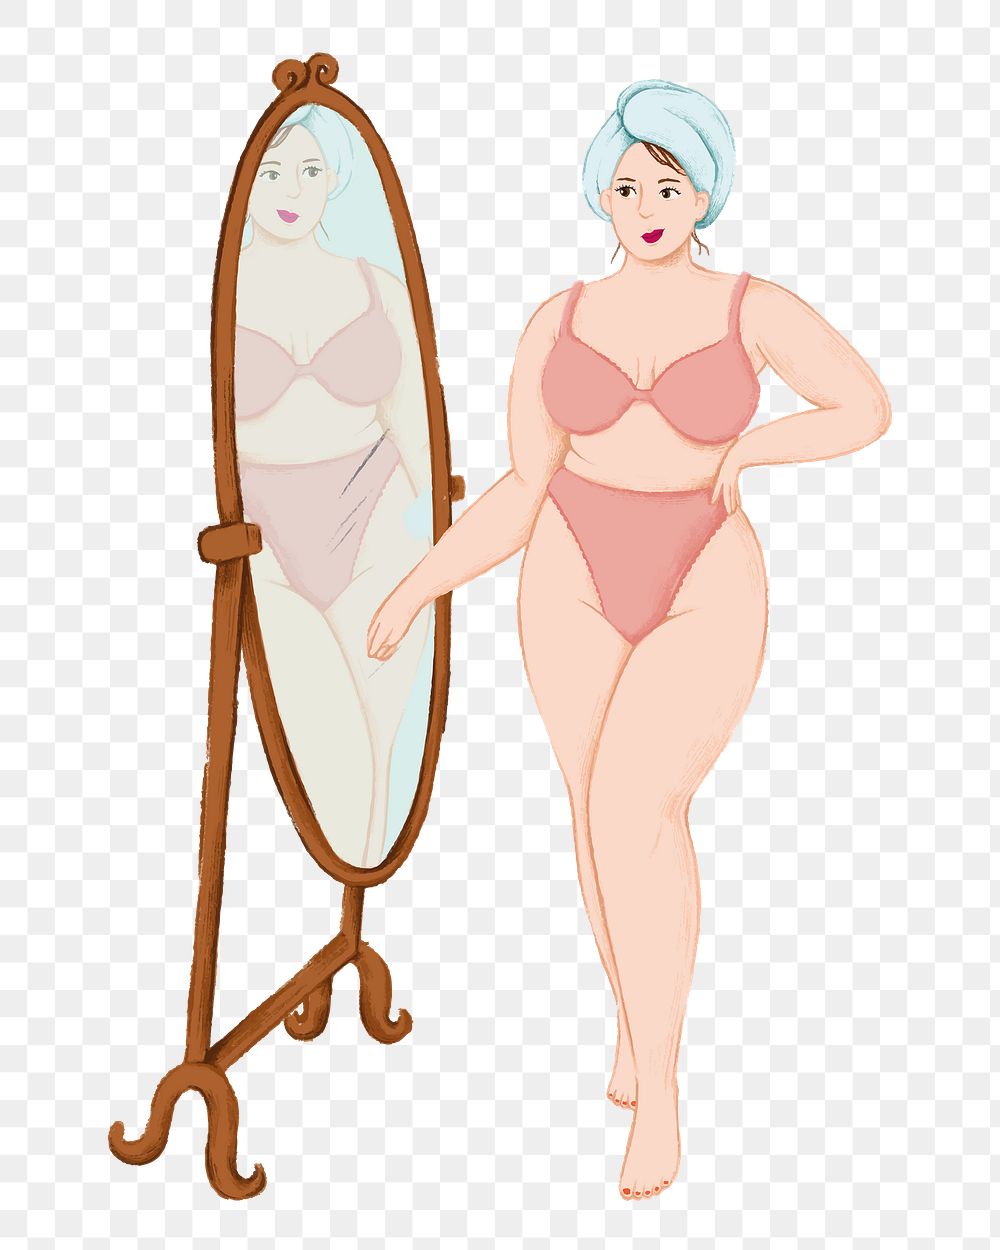 Woman png looking at mirror sticker, self-love illustration, transparent background